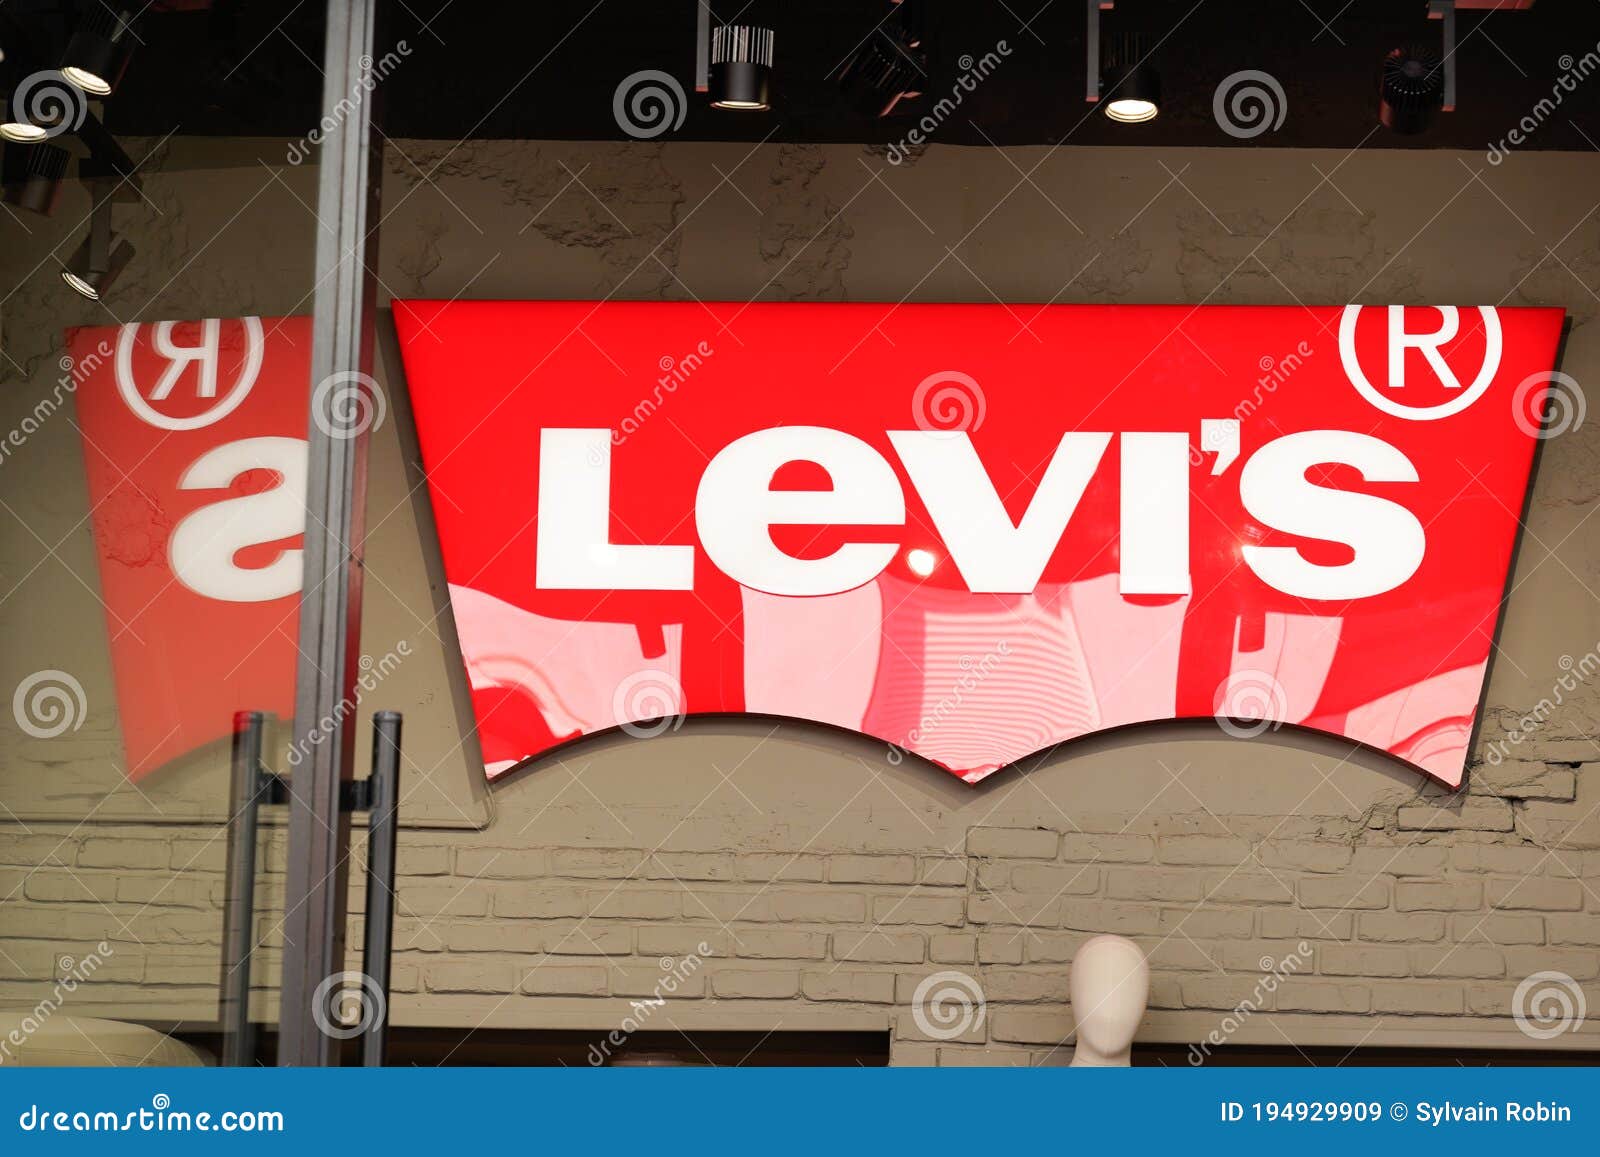 Levi`s Logo Red and Text Sign of Jeans Levis Store of Clothing Fashion Levi  Strauss Editorial Stock Image - Image of company, urban: 194929909